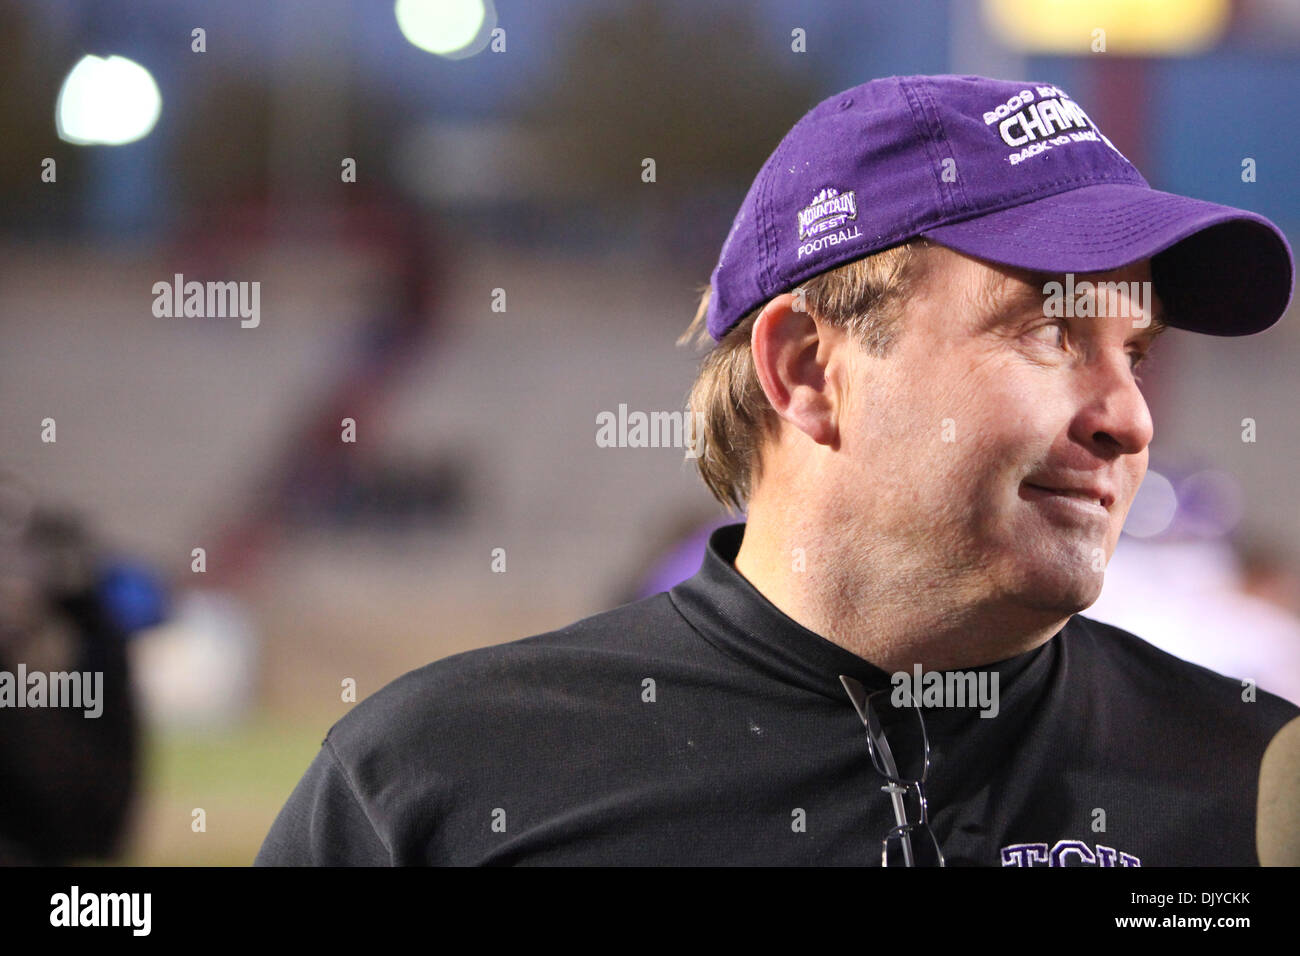 Nov. 27, 2010 - Albuquerque, New Mexico, United States of America - Texas Christian University head coach Gary Patterson smiles after defeating the Lobos. The Mountain West Conference Champions TCU defeated the Lobos 66-17 at University Stadium in Albuquerque, New Mexico. (Credit Image: © Long Nuygen/Southcreek Global/ZUMAPRESS.com) Stock Photo